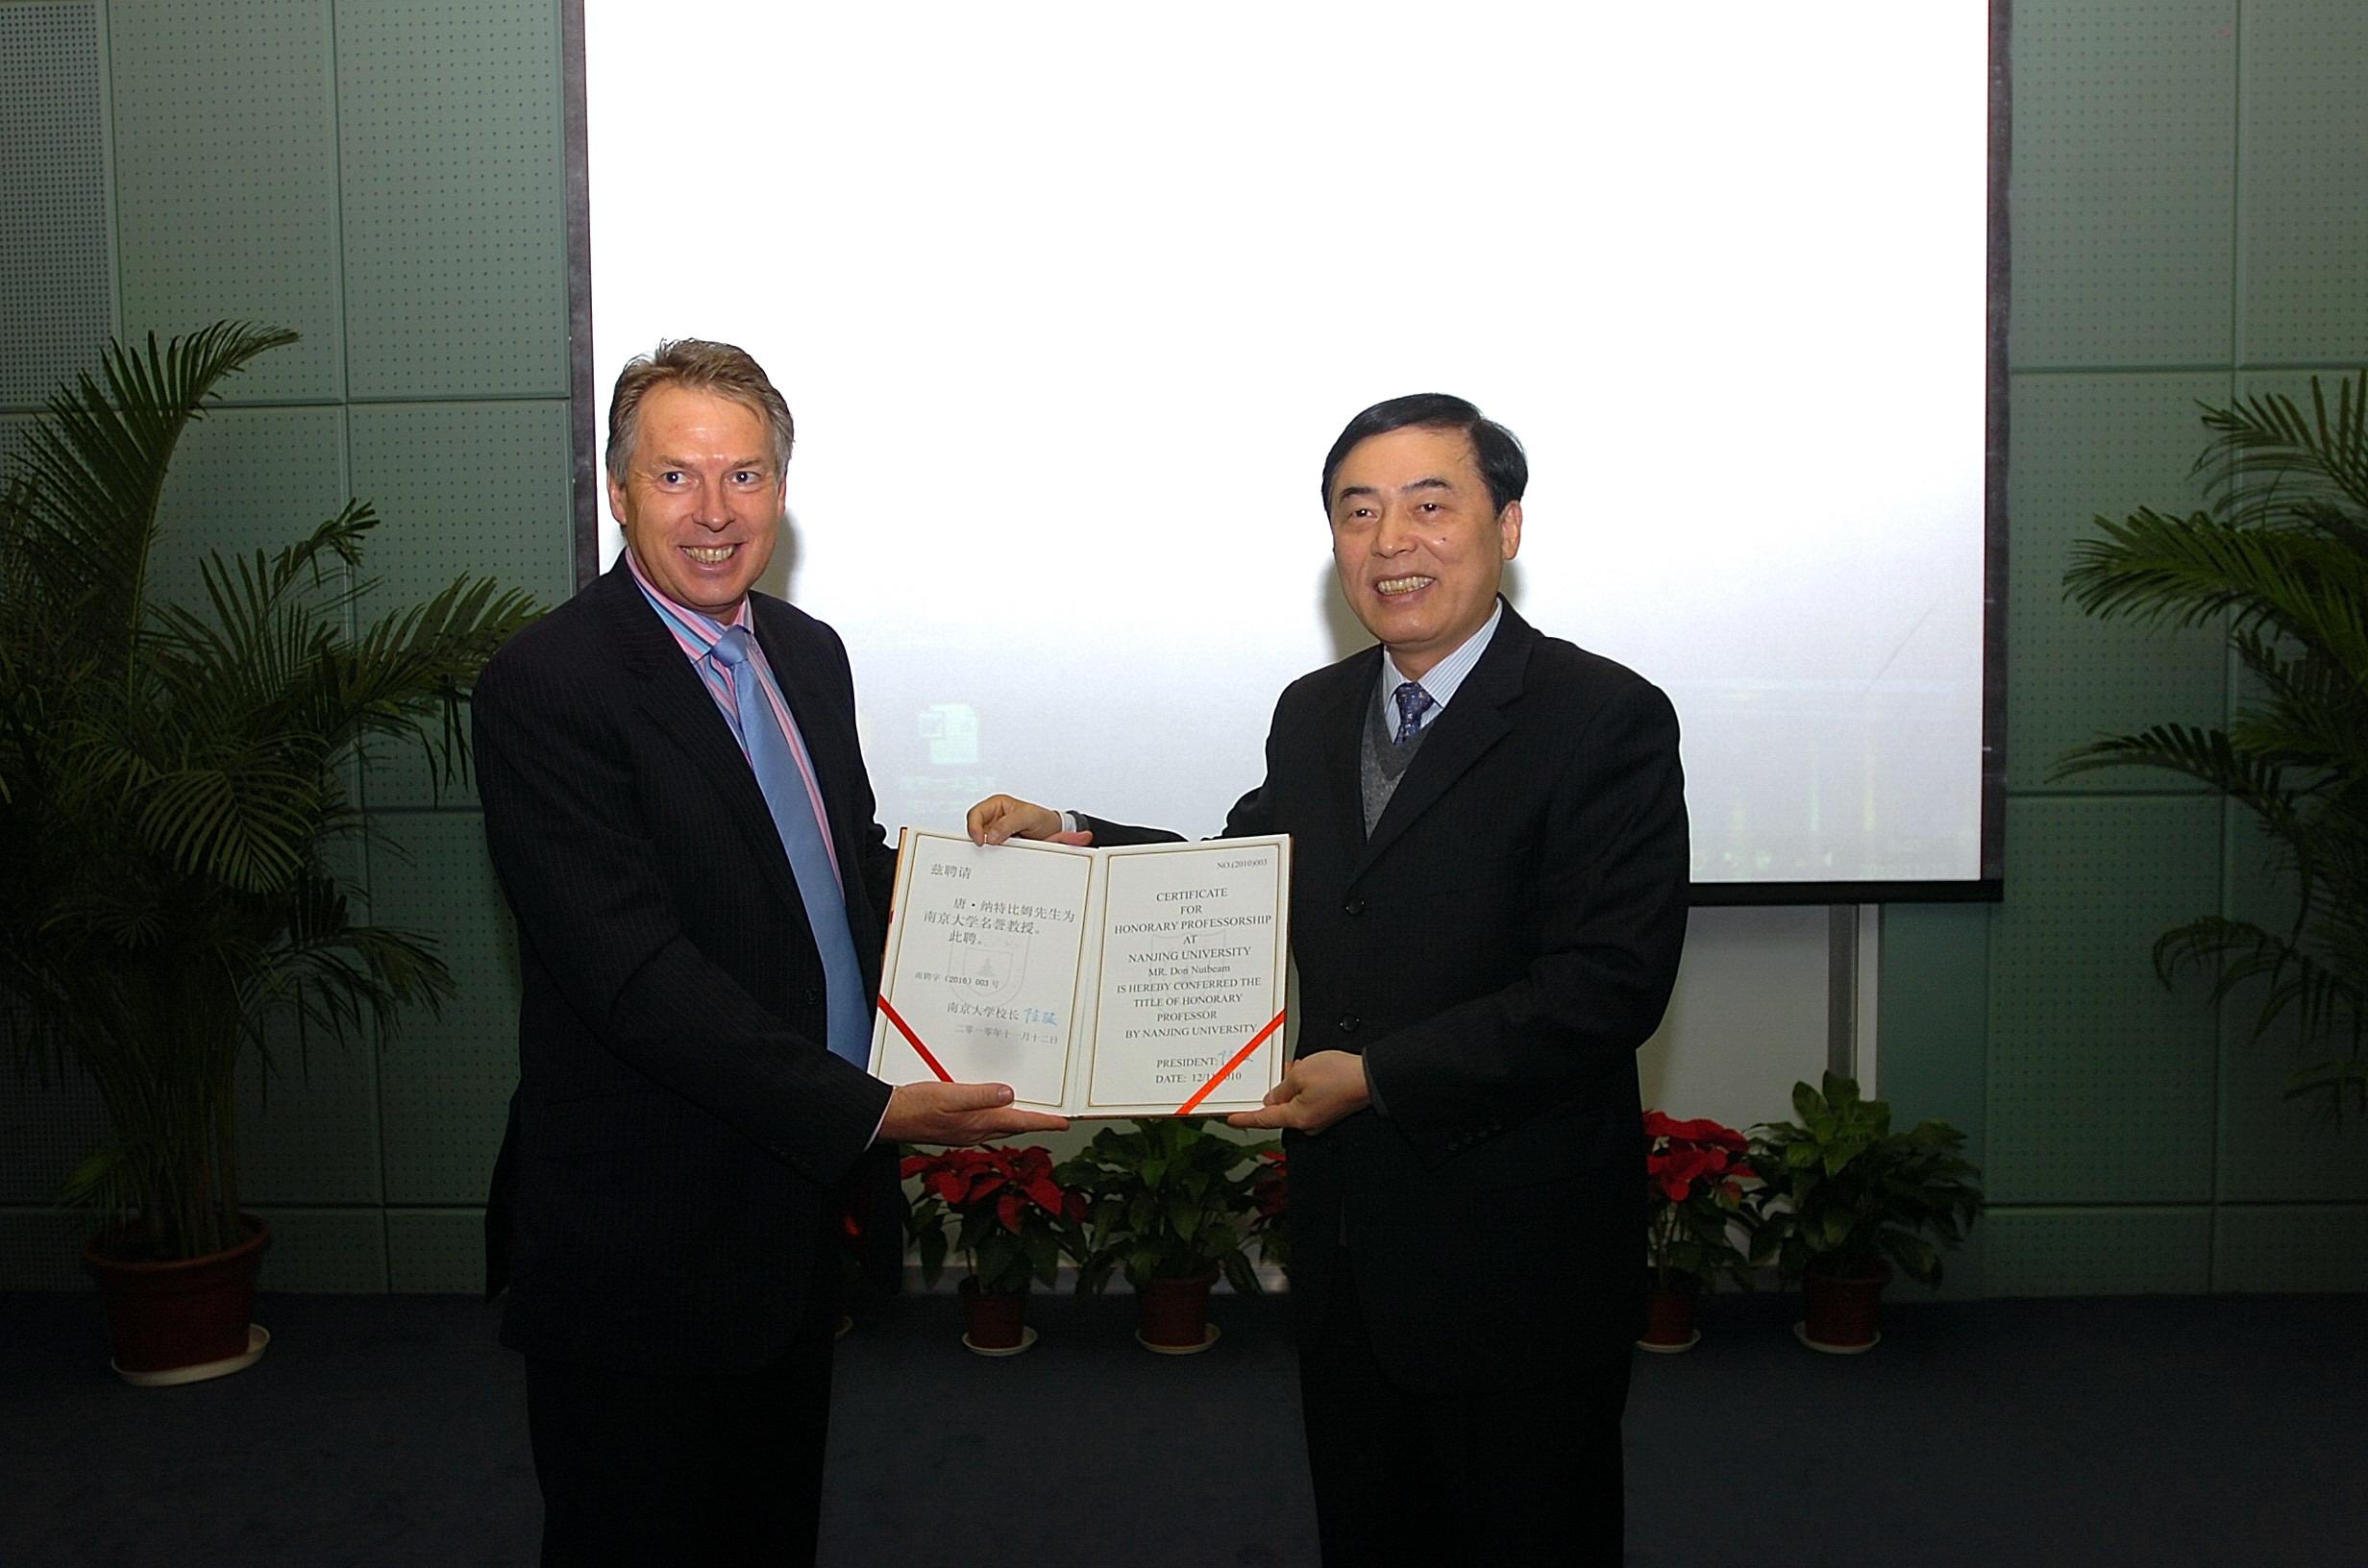 University  of  Southampton  Vice - Chancellor  Don  Nutbeam  Named  Honorary  Professor  by  Nanjing  University